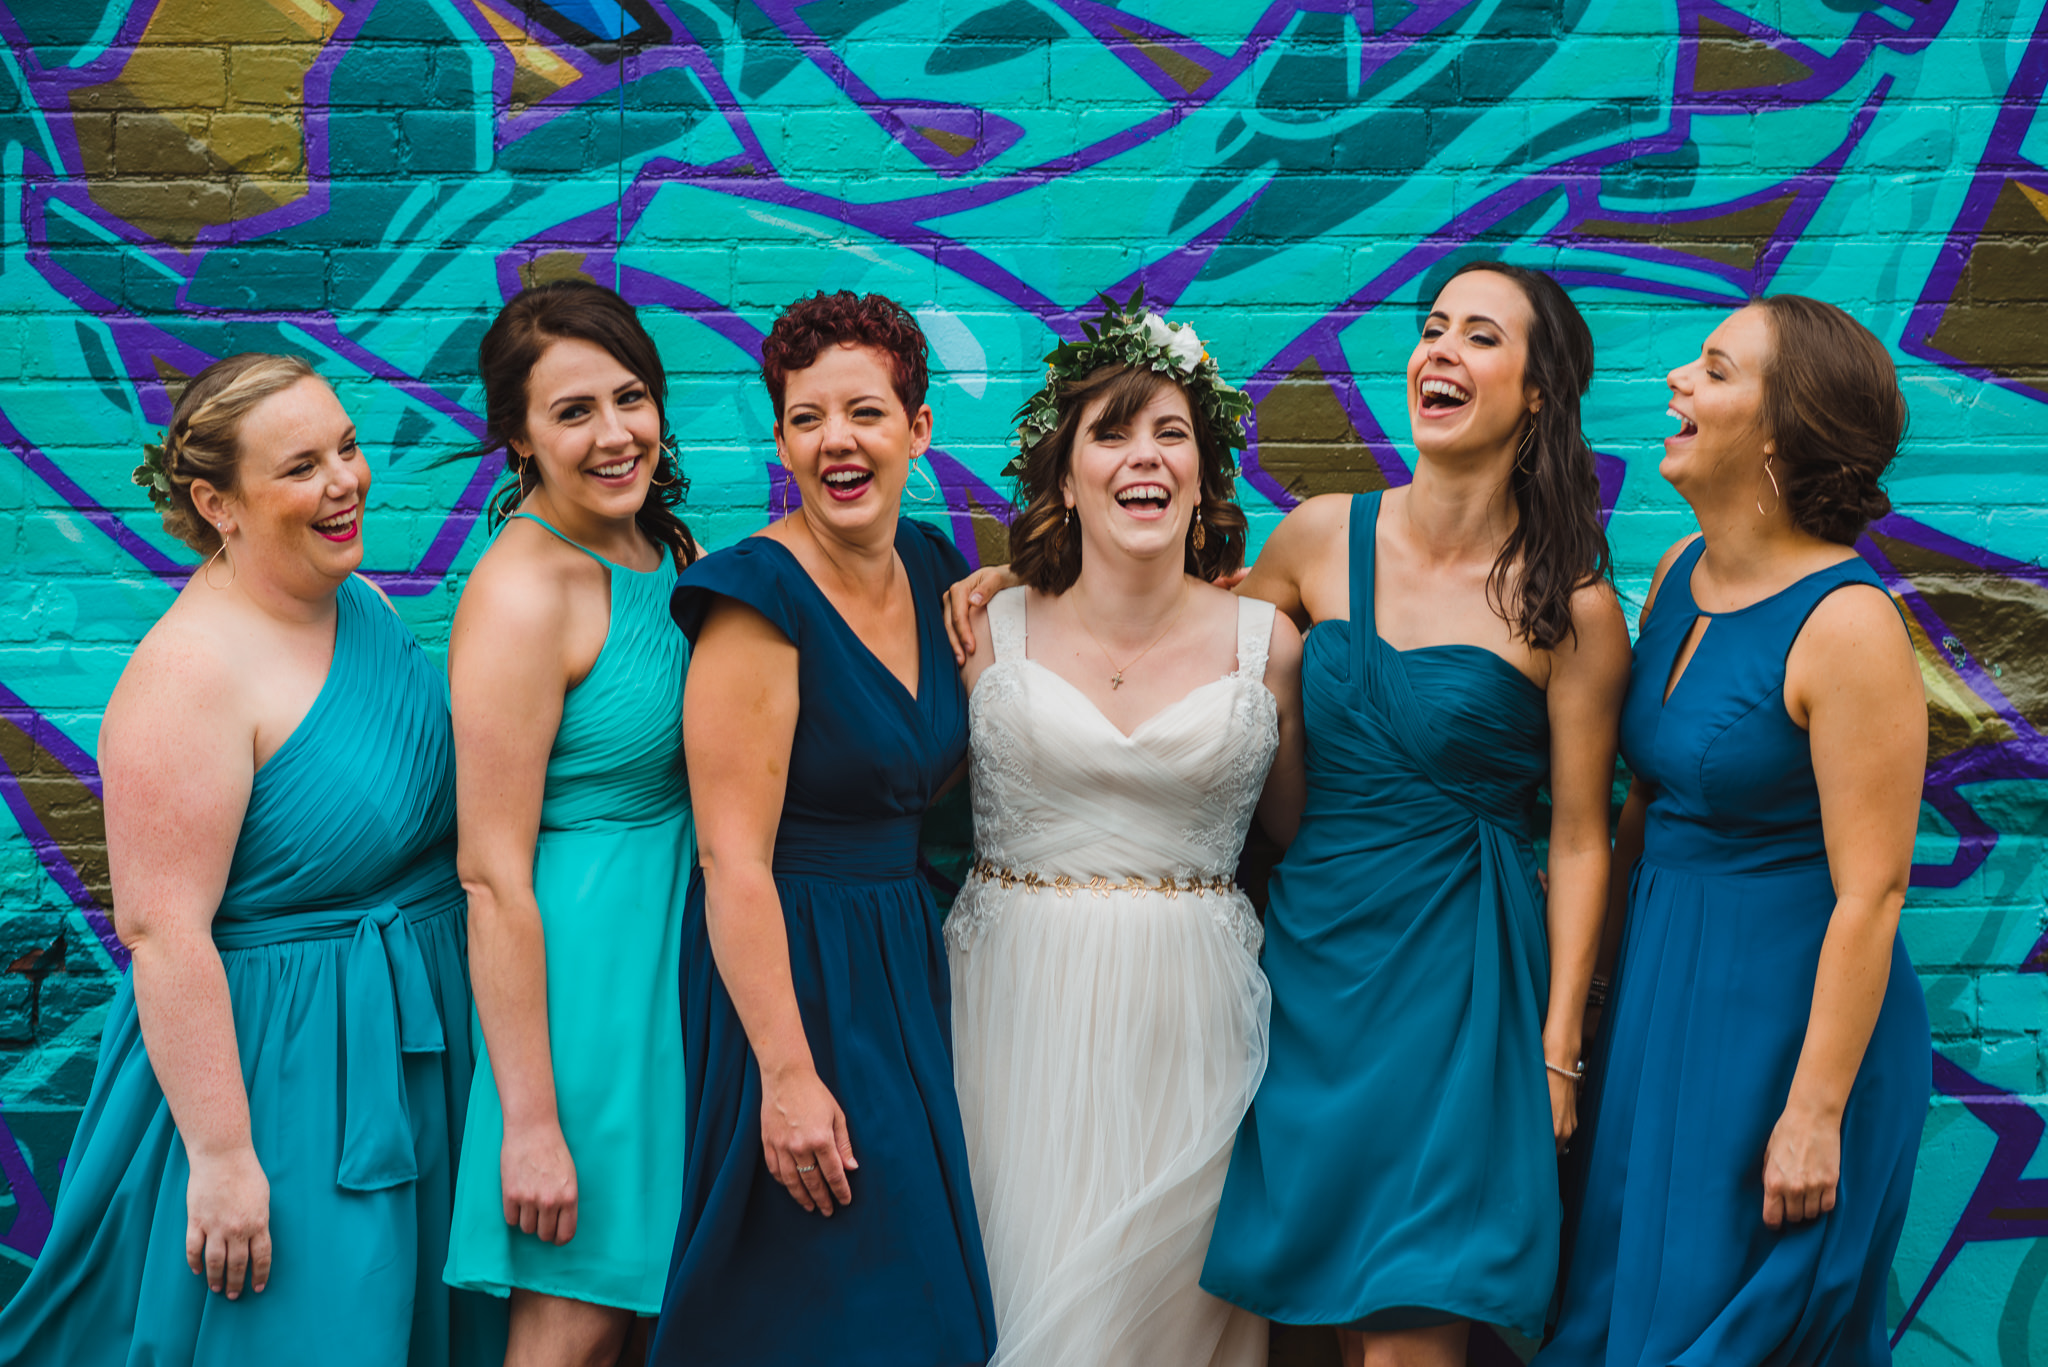 Bridal party in teal dresses laughing in Graffiti alley Toronto